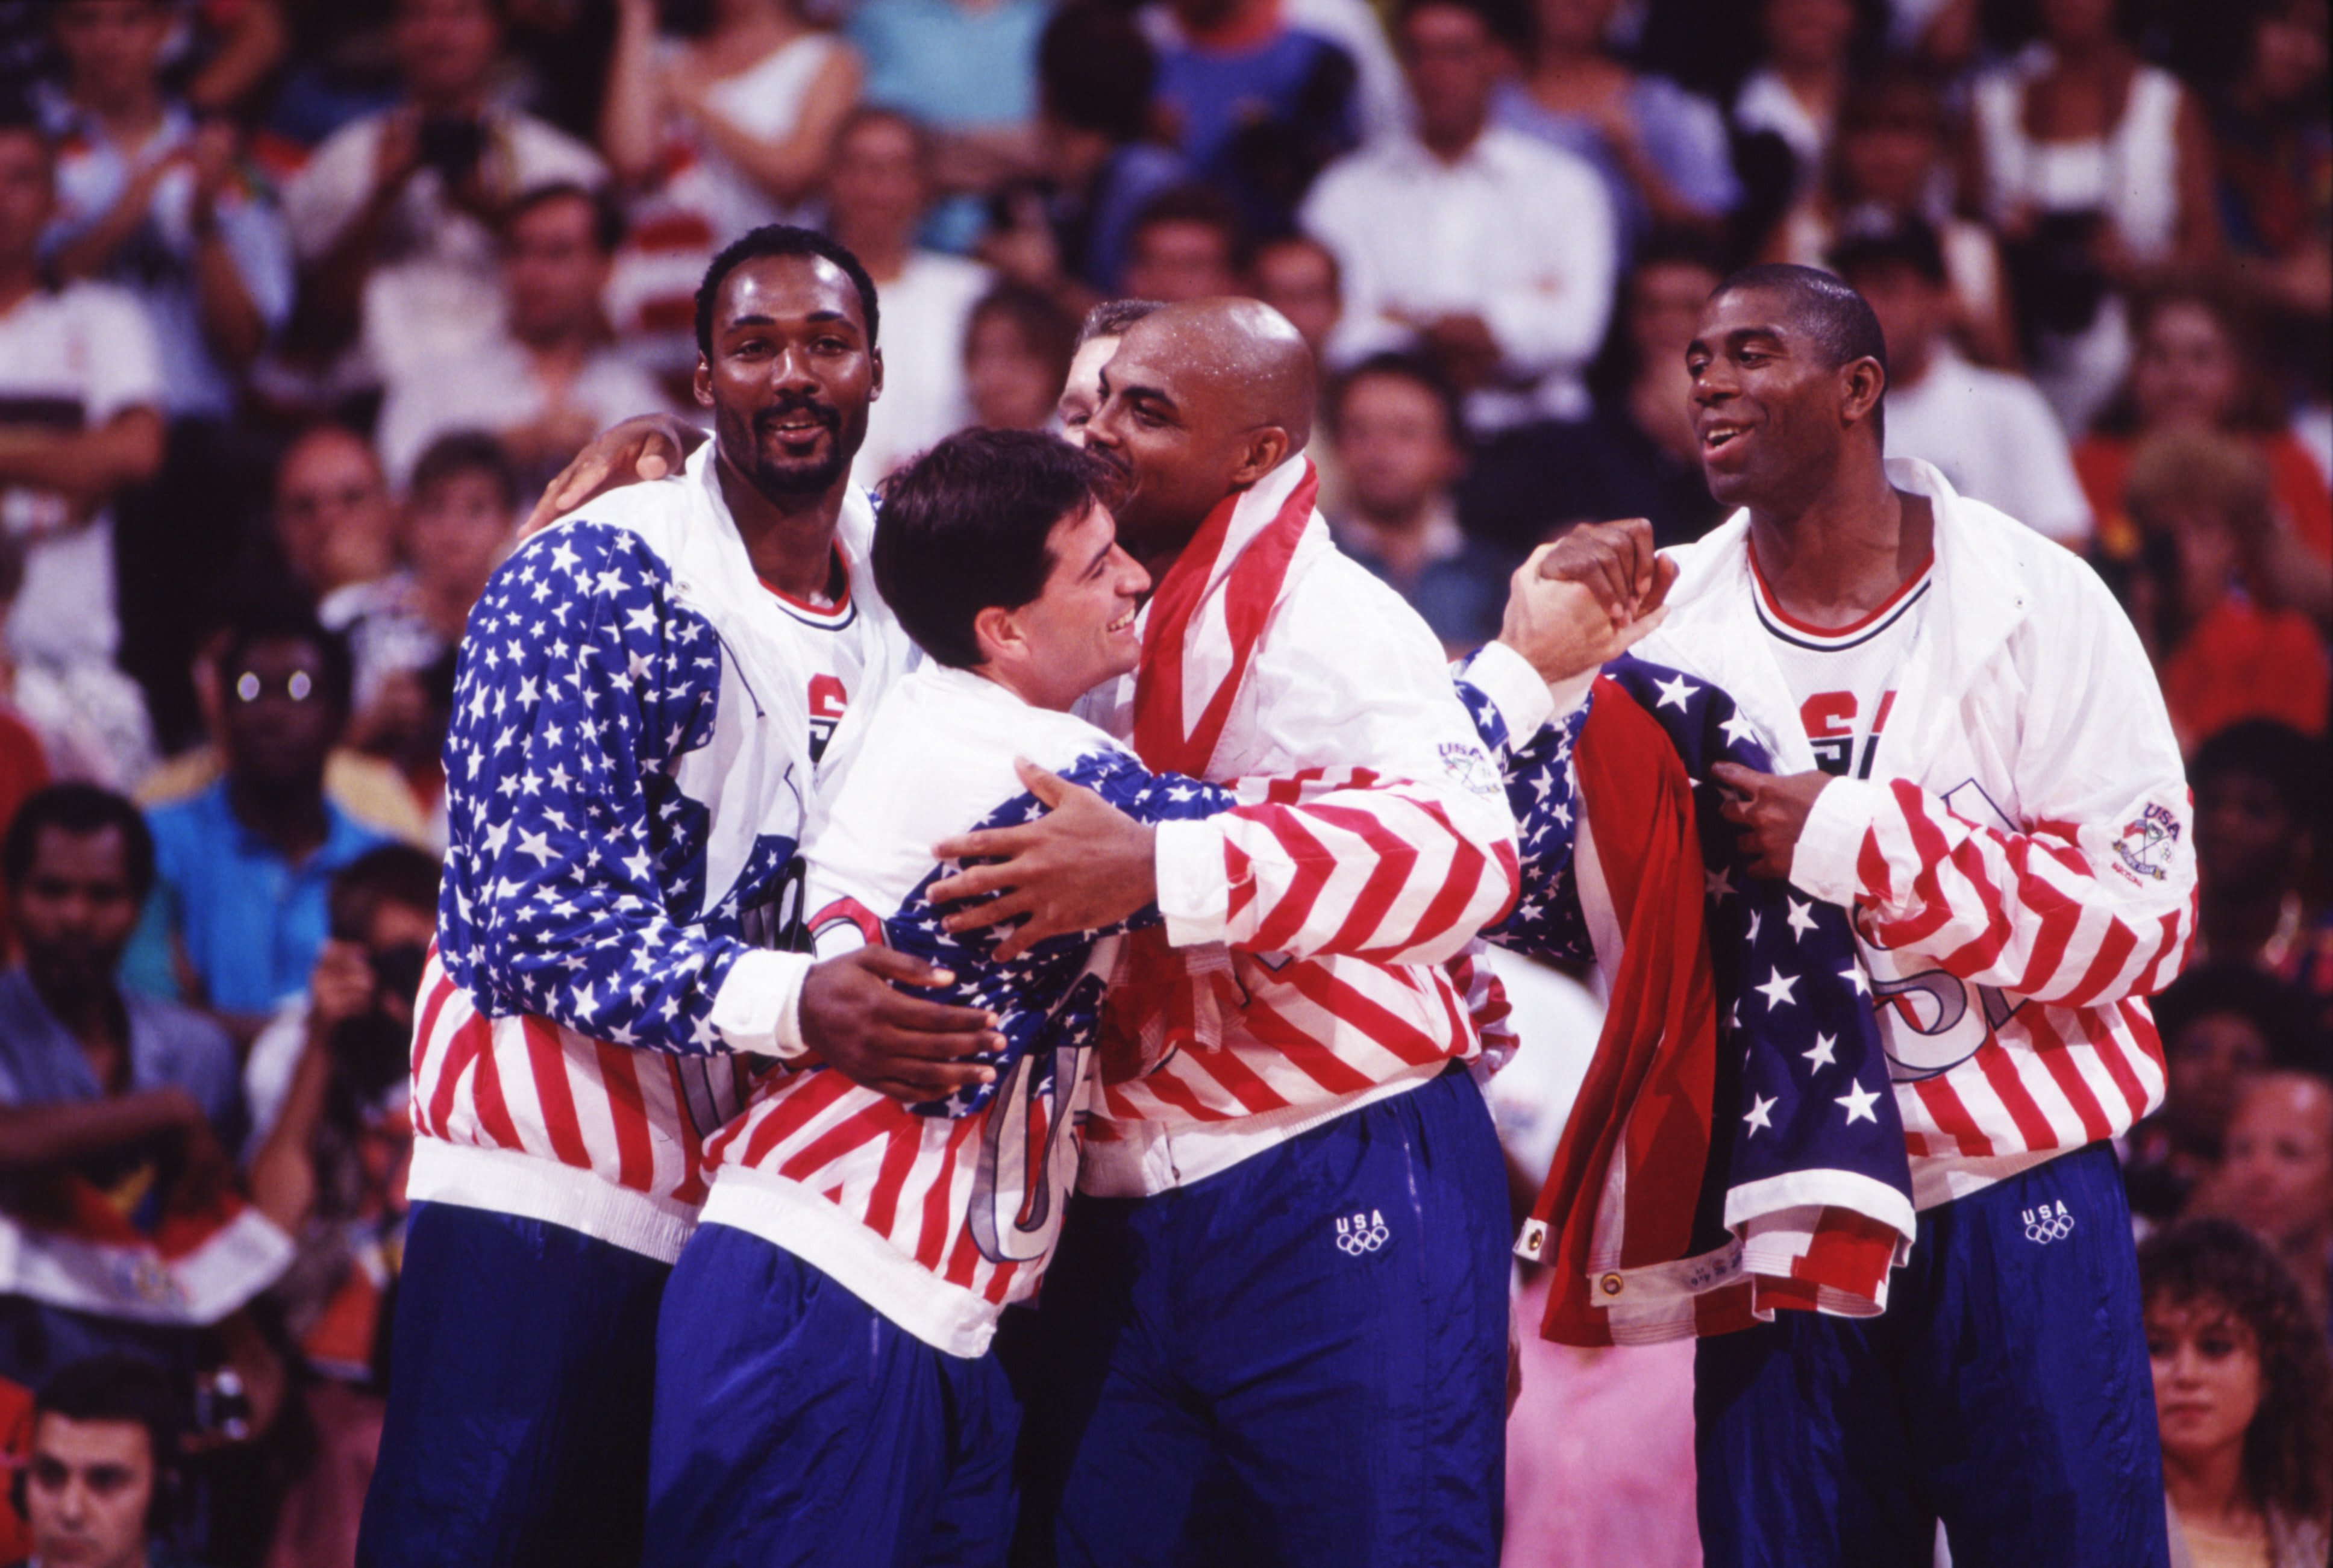 USA Olympic Dream Team 1992 - Where are they now?